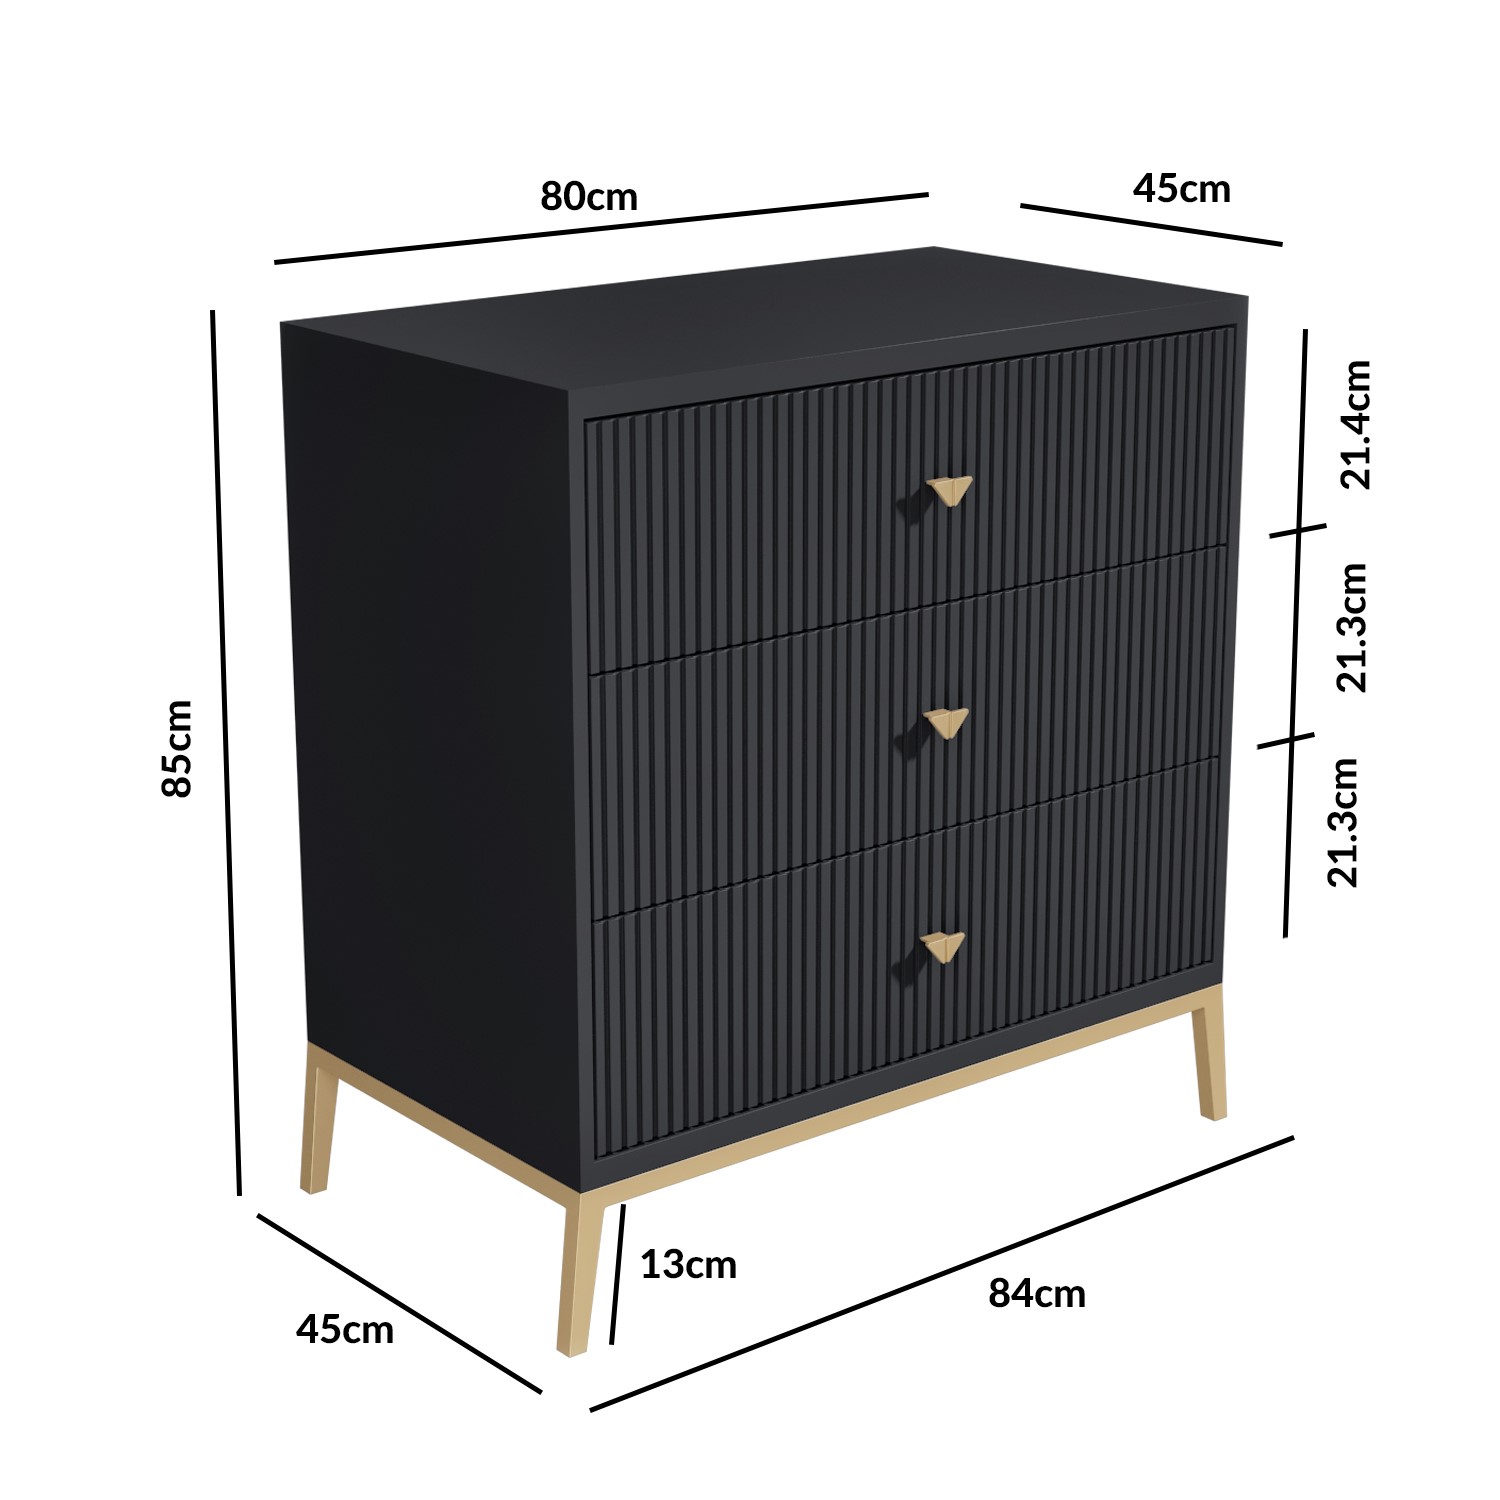 Read more about Dark grey art deco chest of 3 drawers with legs maya